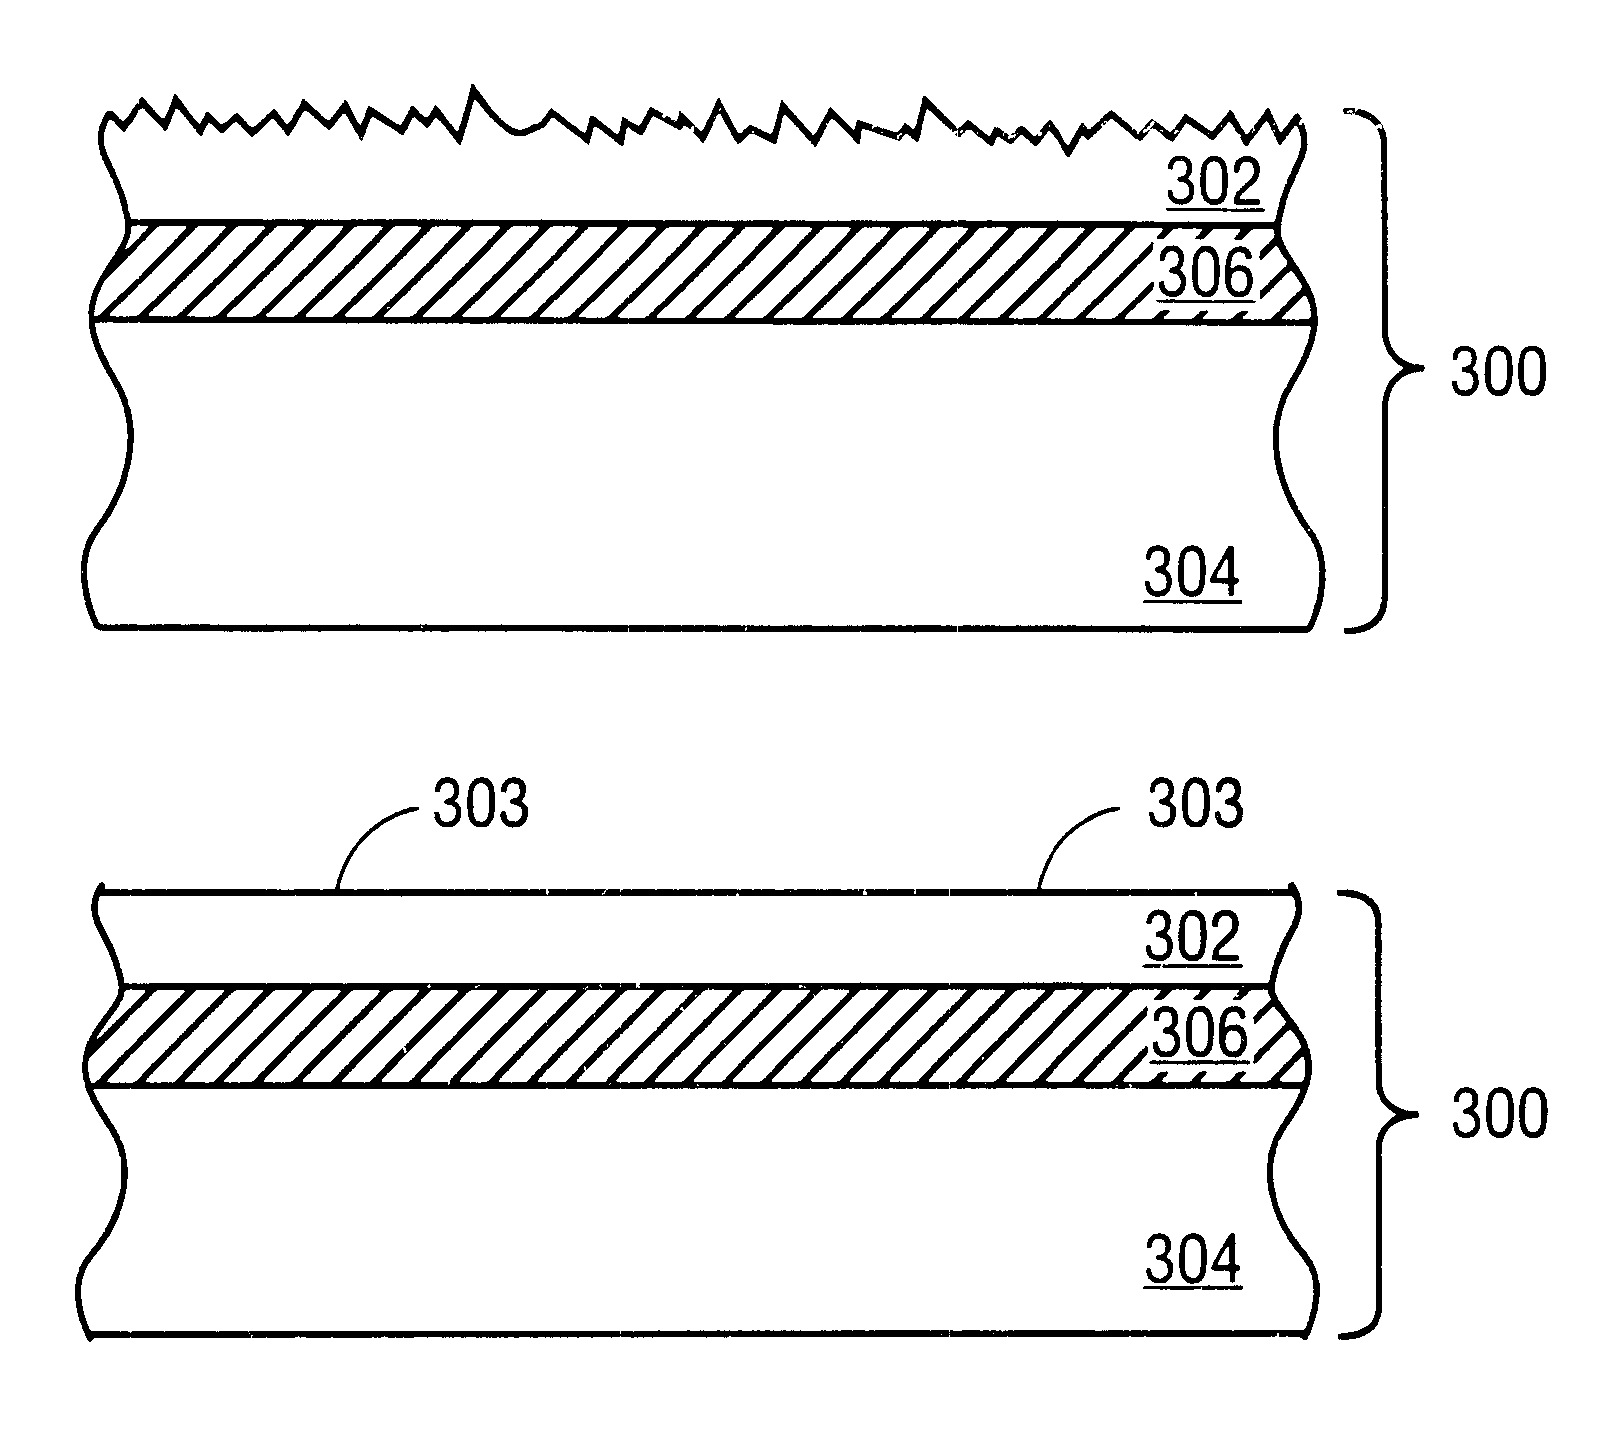 Apparatus and method for surface finishing a silicon film